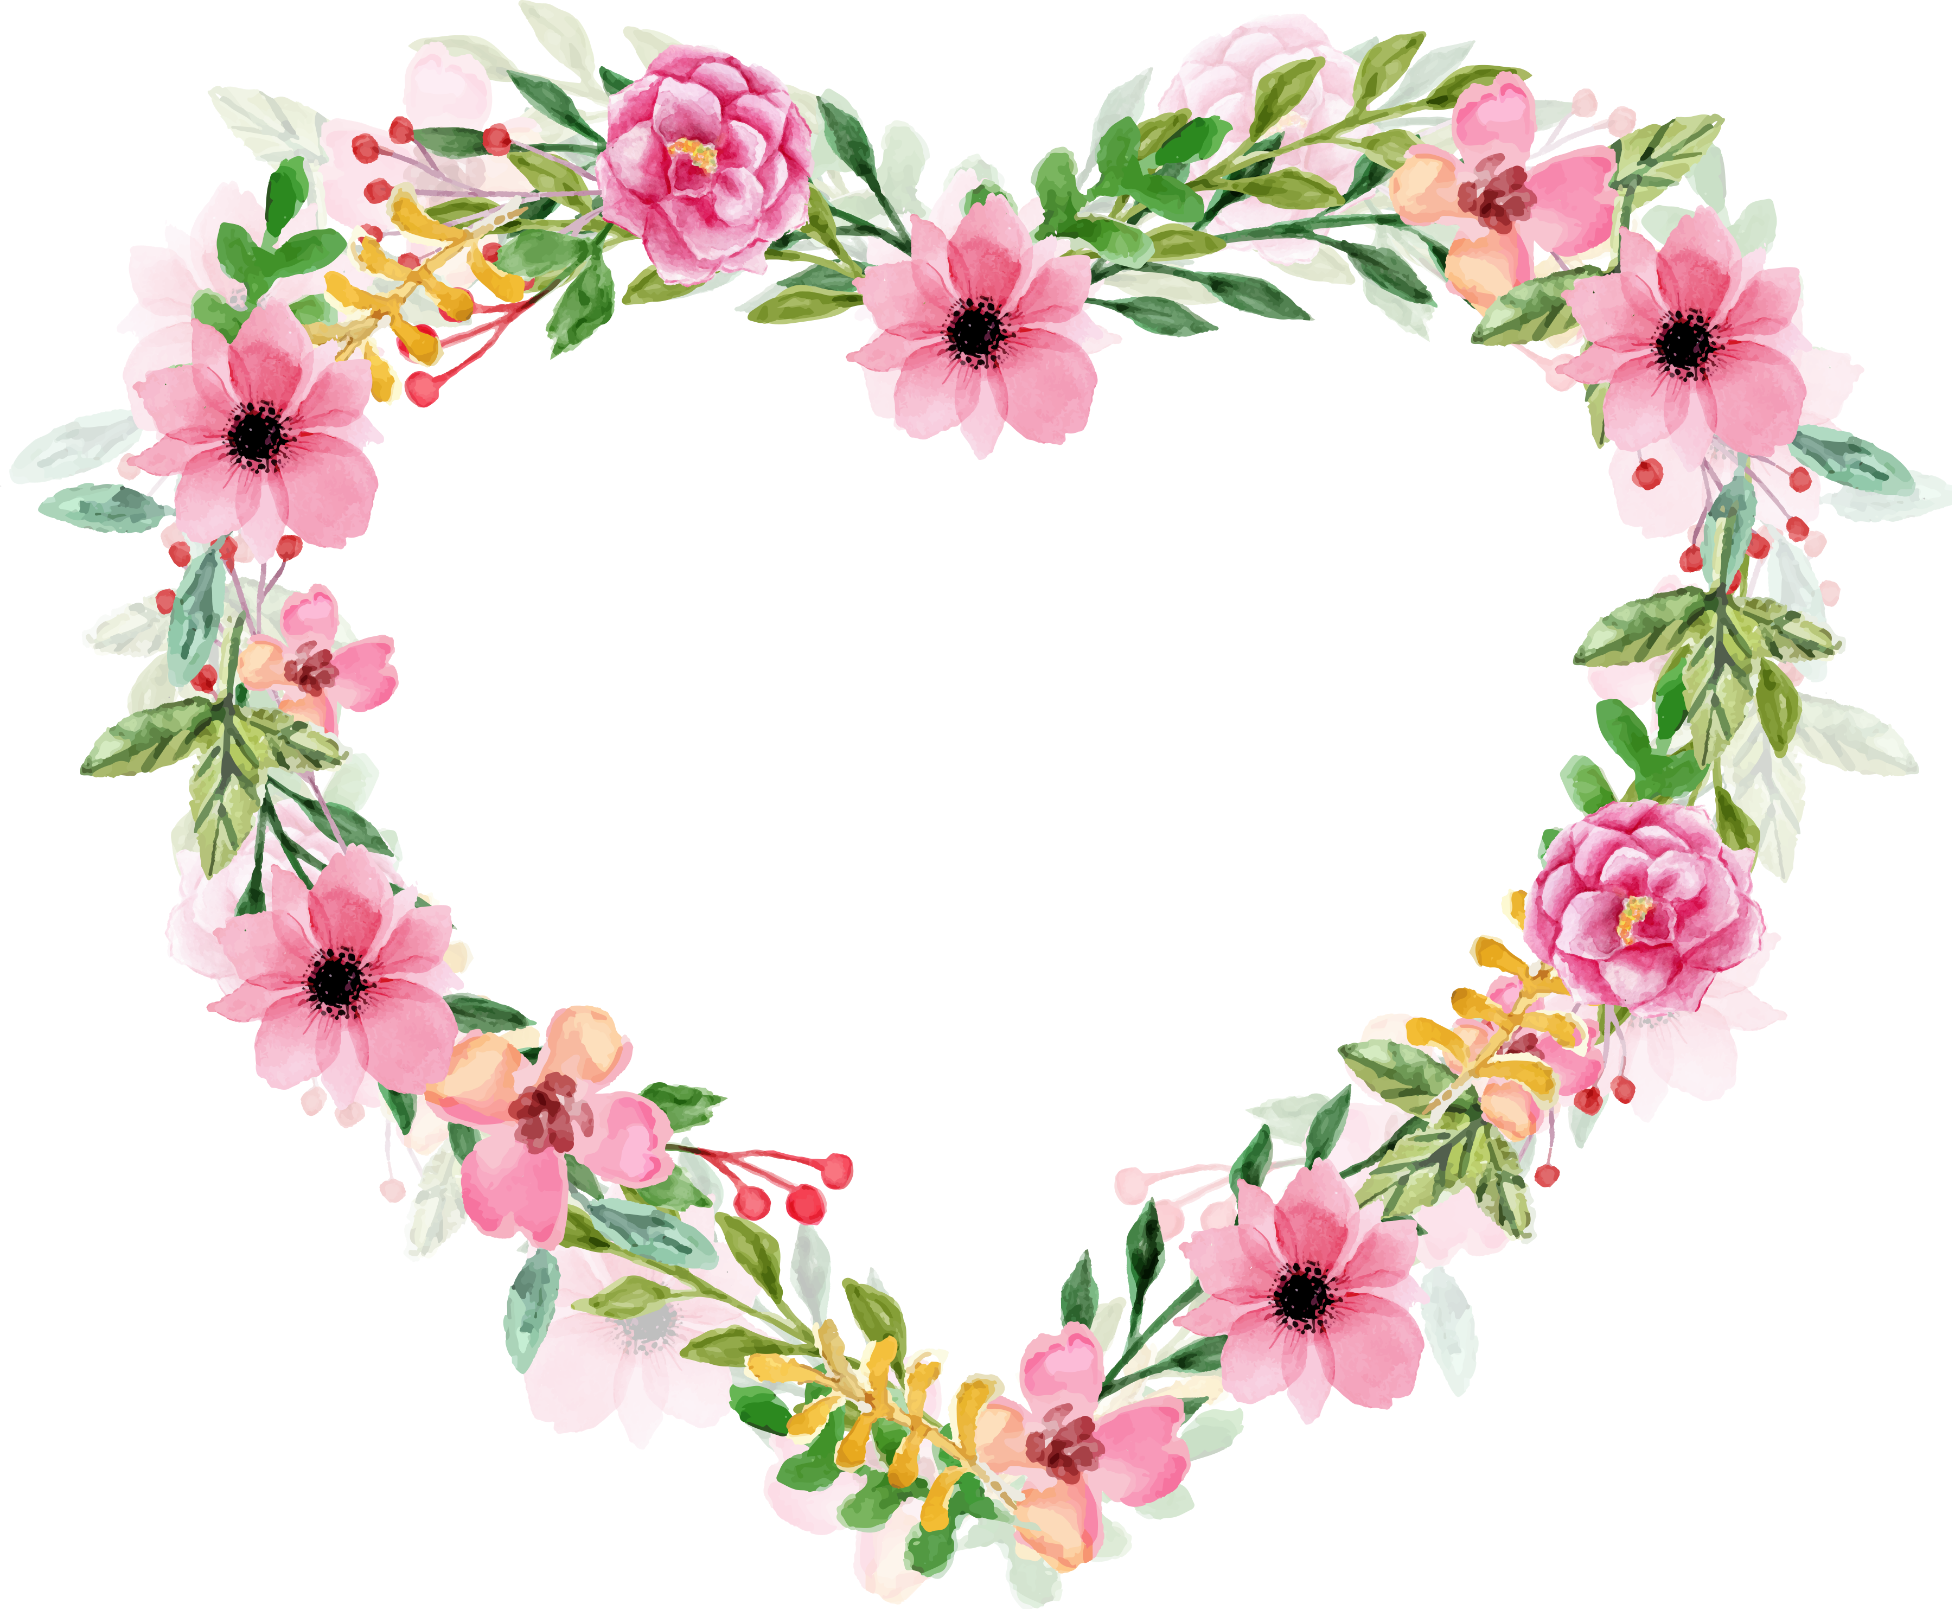 Download PNG image - Romantic Flower Heart PNG Image 